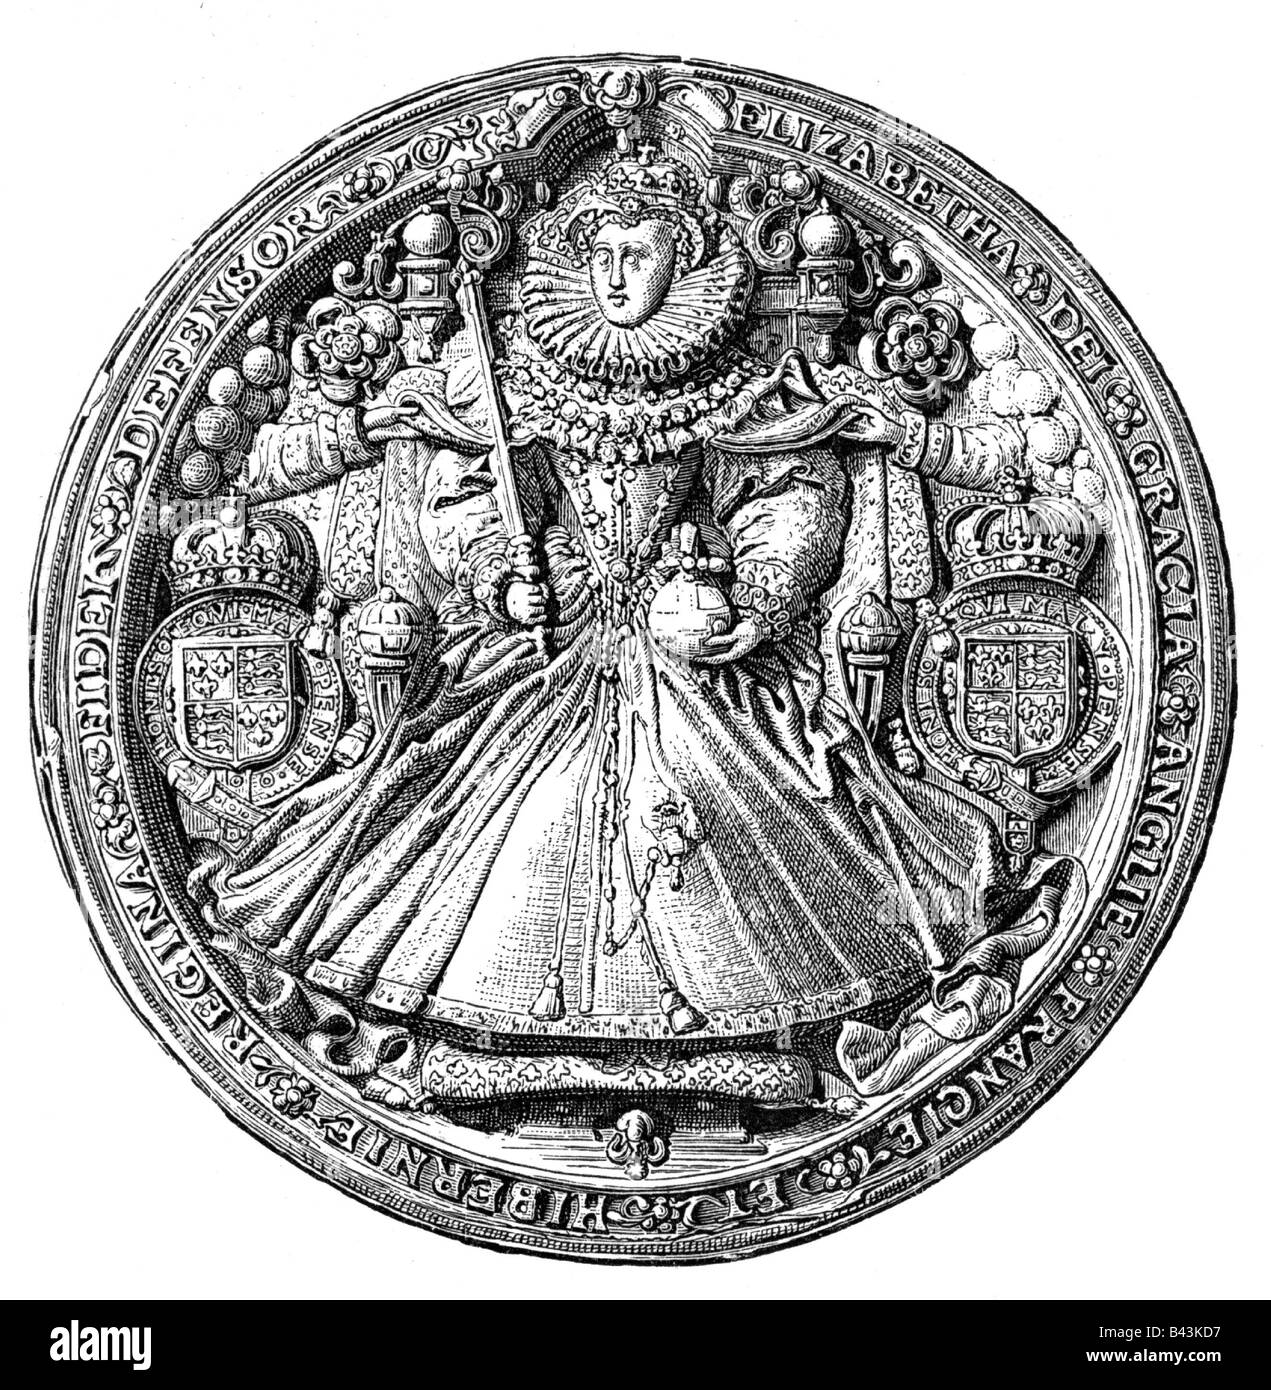 Elizabeth I, 7.9.1533 - 24.3.1603, Queen of England since 17.11.1558, throne signet, wood engraving, 19th century, after original, Stock Photo